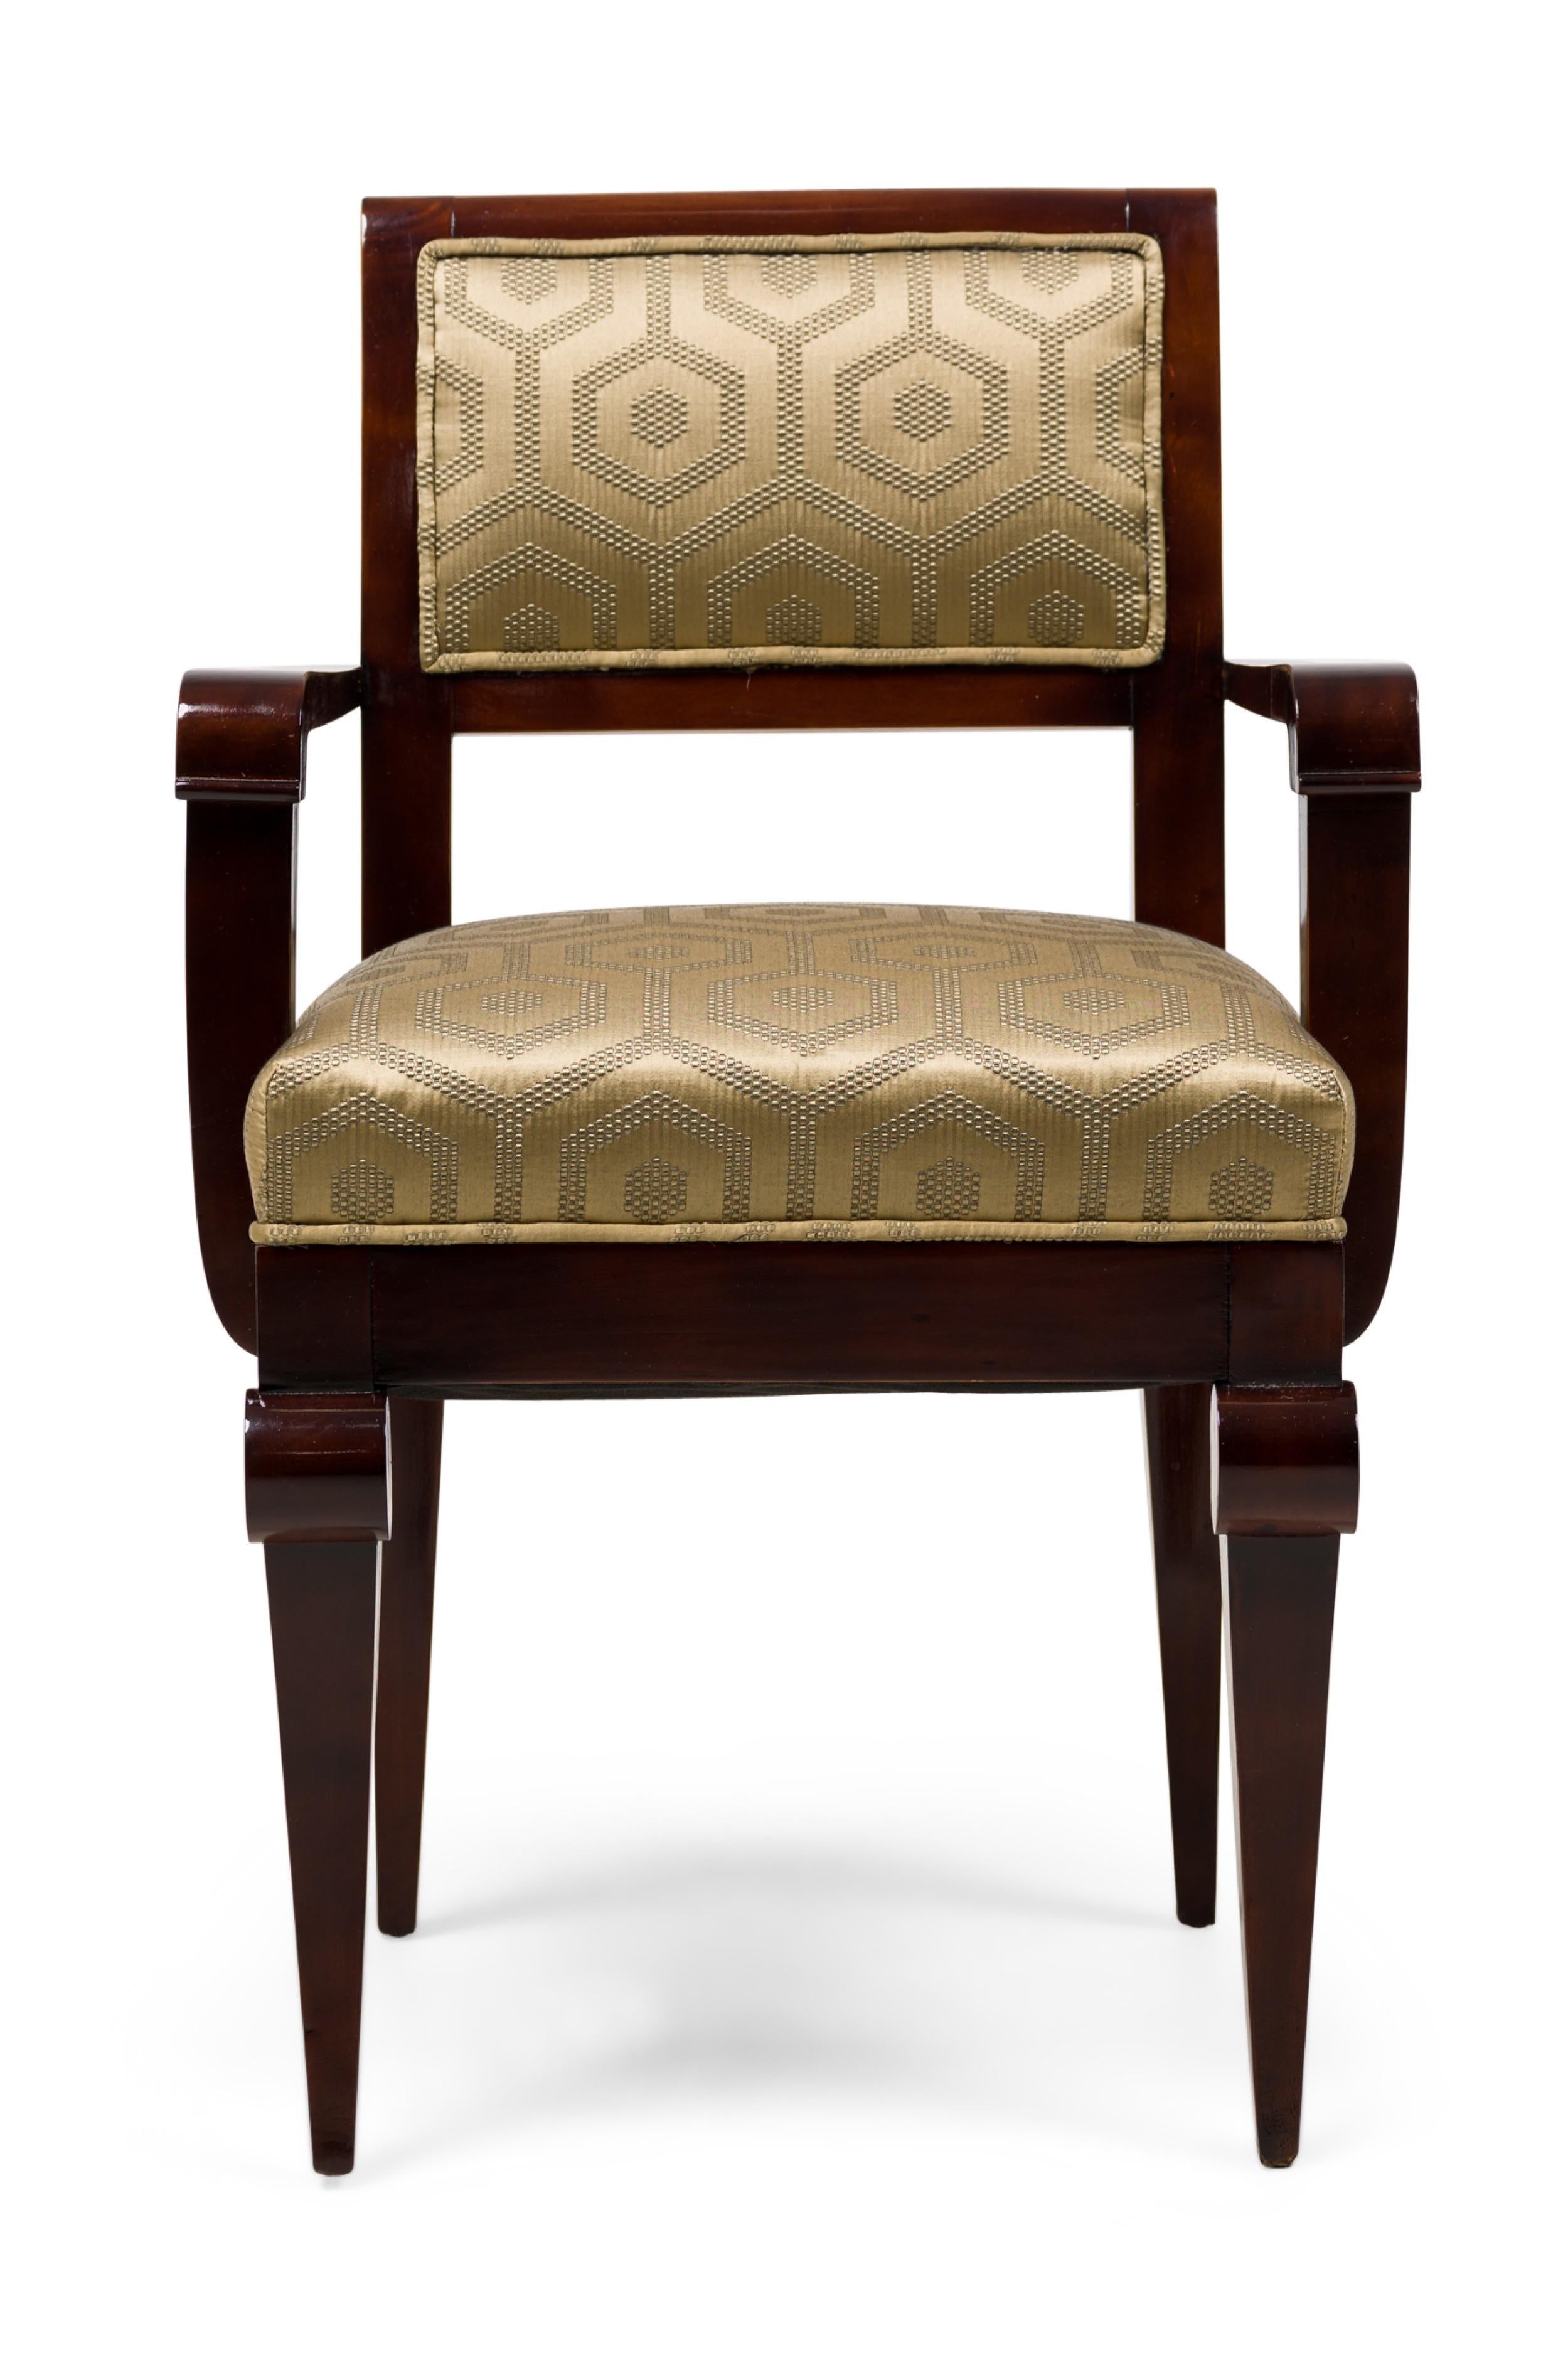 SET of 6 French Art Deco dining armchairs with amboyna wood frames, upholstered in a gold fabric with a hexagonal geometric pattern (PRICED AS SET) (JULES LELEU)
